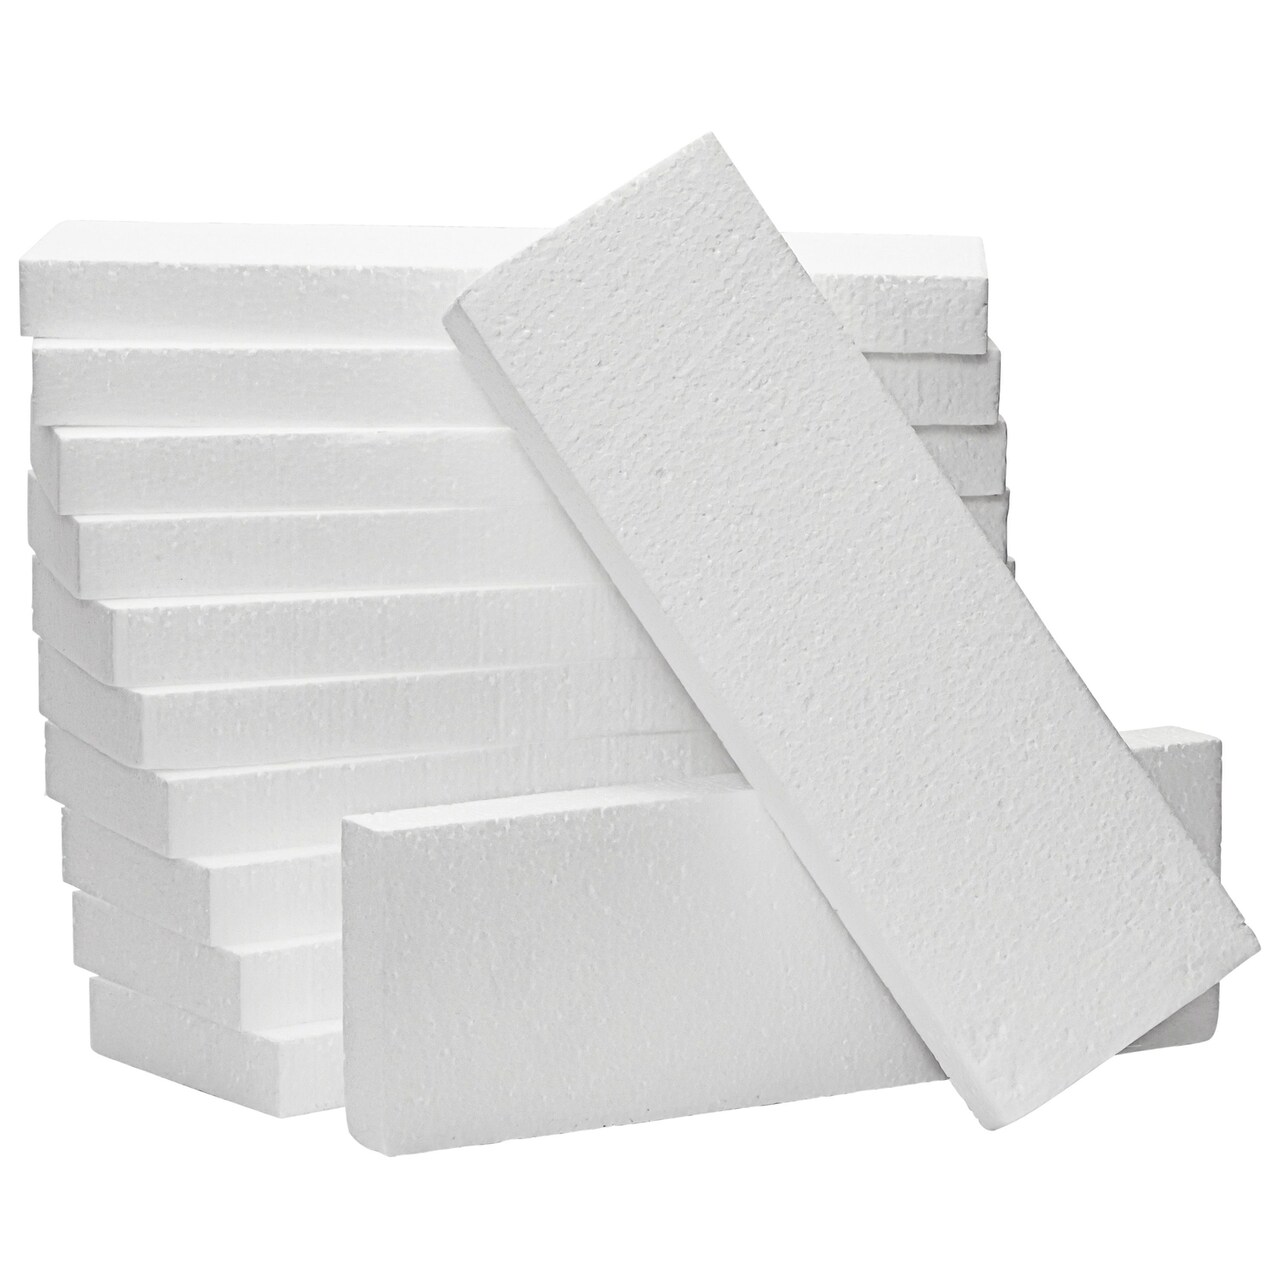 1-Inch Thick Foam Rectangle Blocks for Crafts, Diorama Supplies,  Centerpieces, School Projects, Packaging, Polystyrene Boards for DIY  Sculpture (12x4x1 in, 12-Pack)